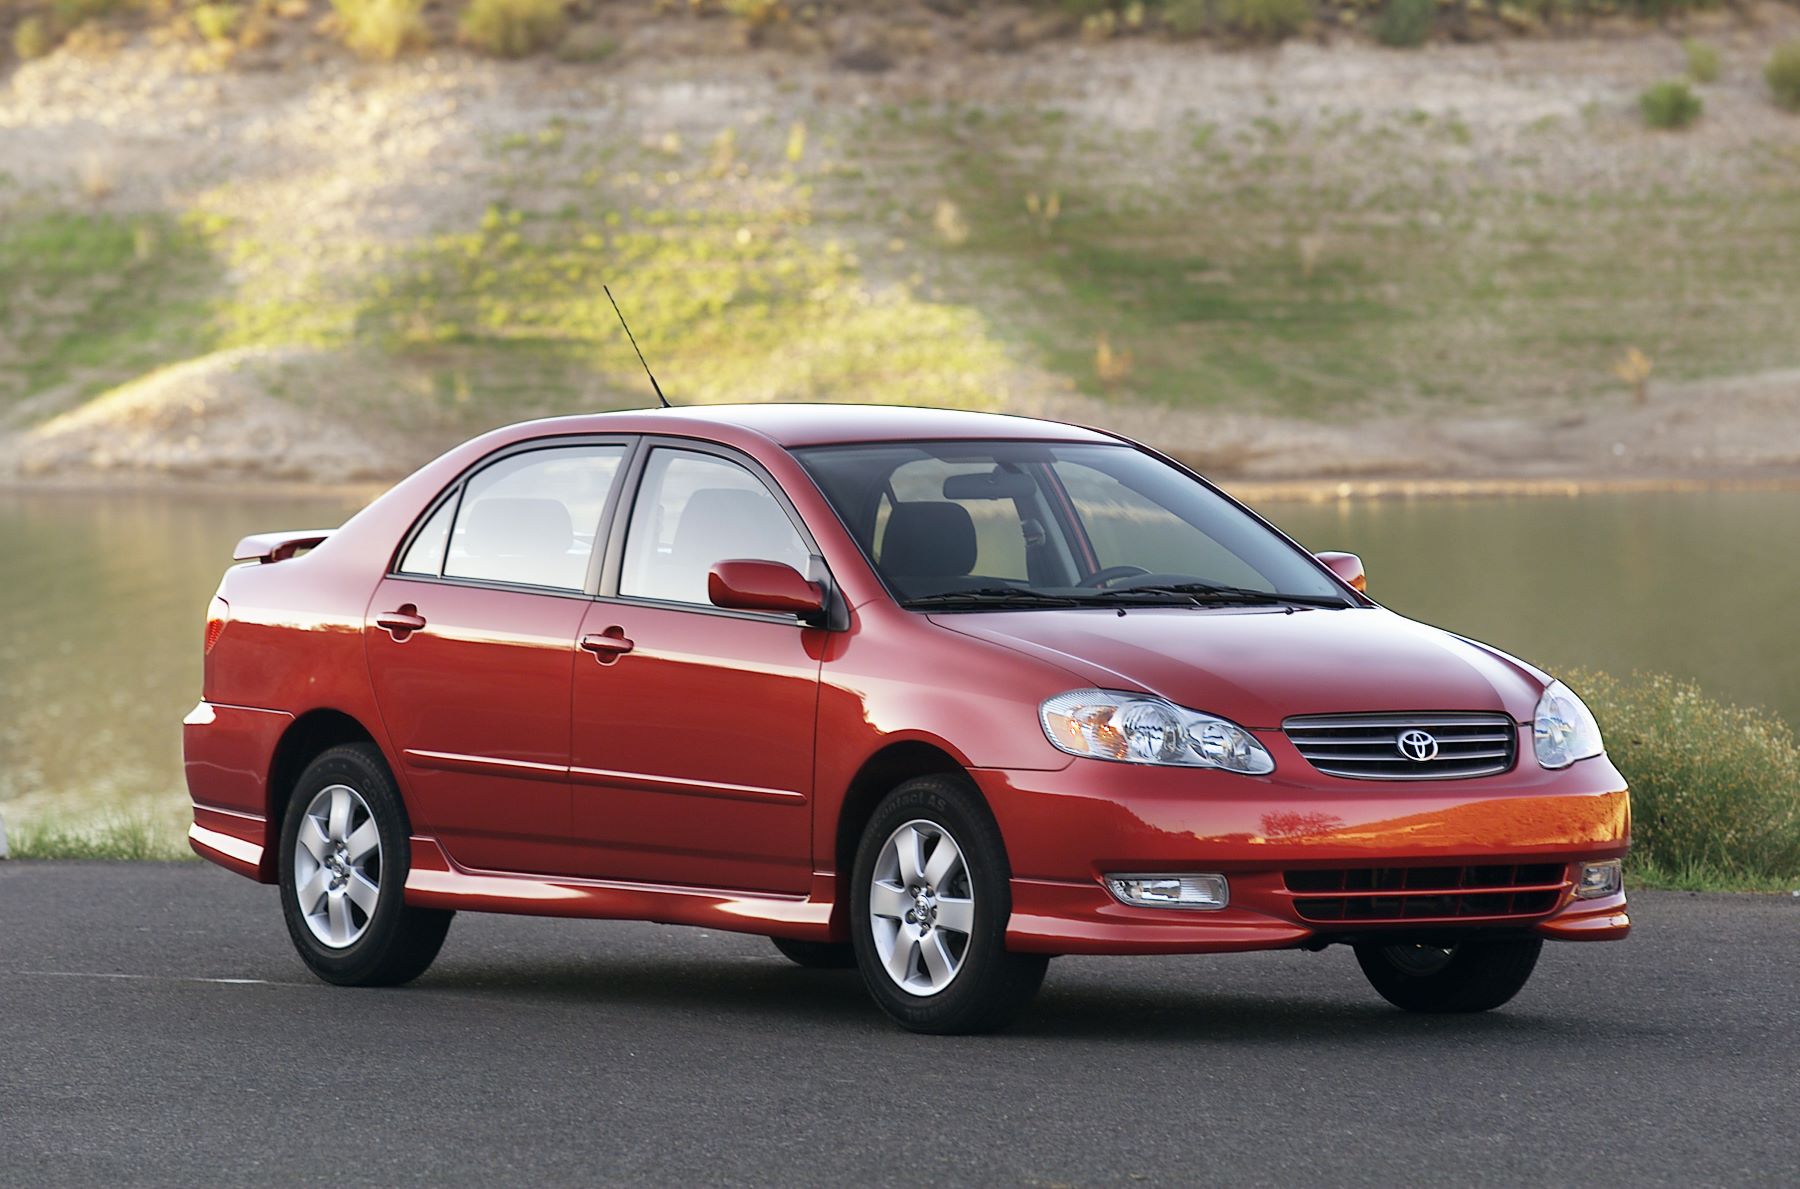 The body style for model years 2003, 2004, 2005 and 2006 and the Toyota Corolla compact sedan generation